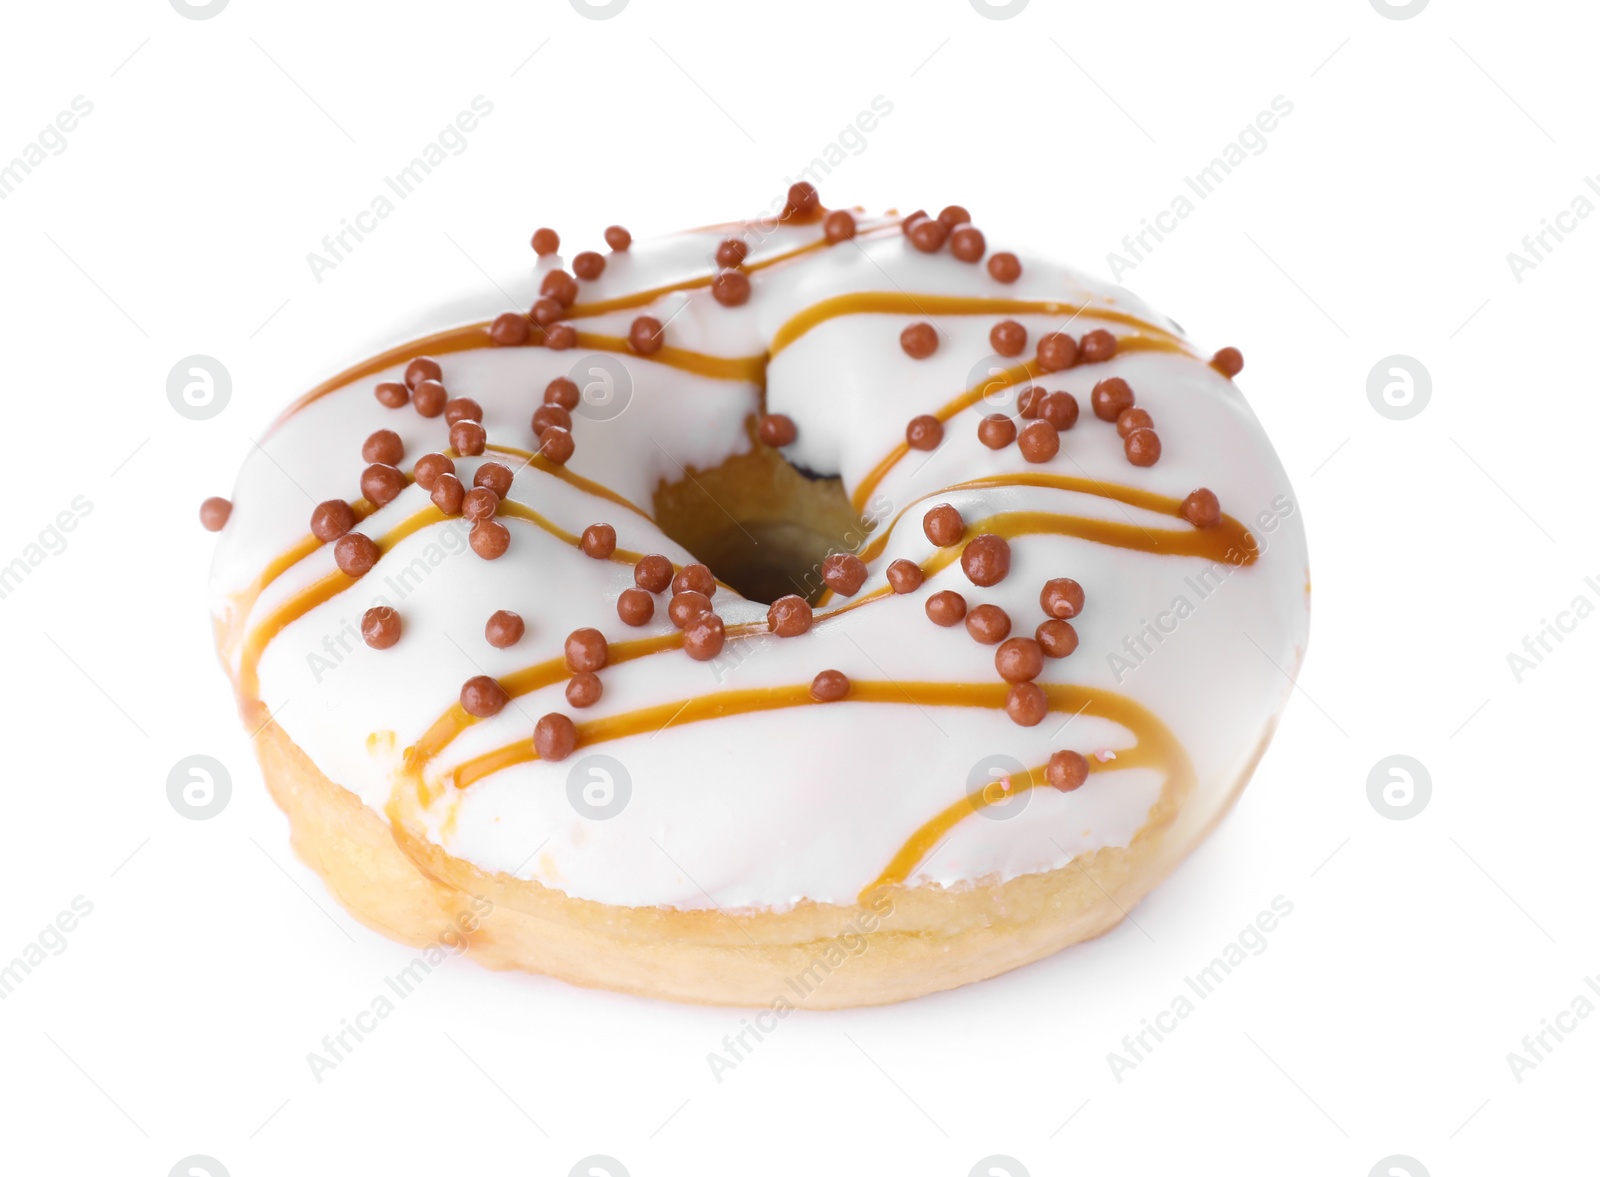 Photo of Tasty glazed donut decorated with sprinkles isolated on white